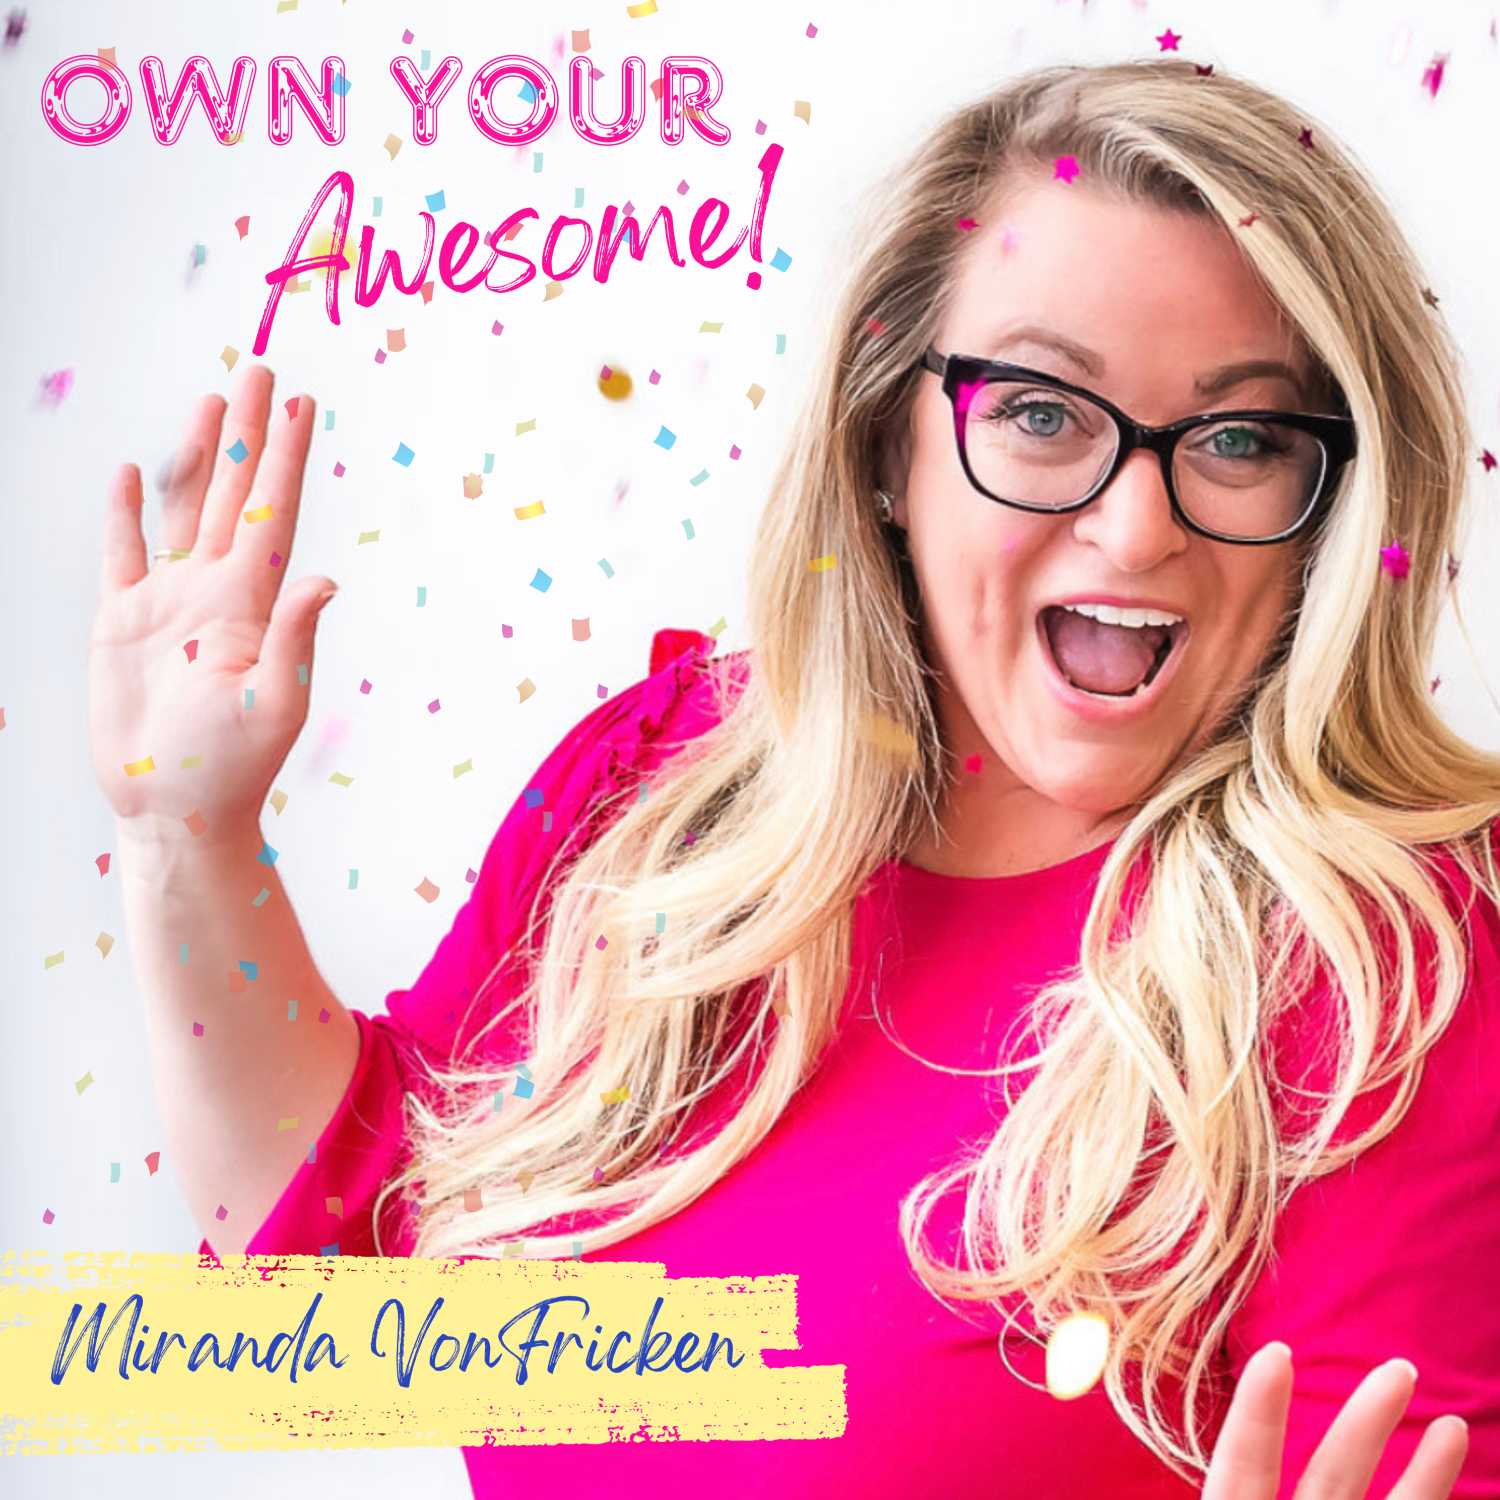 1. Welcome to Own Your Awesome!